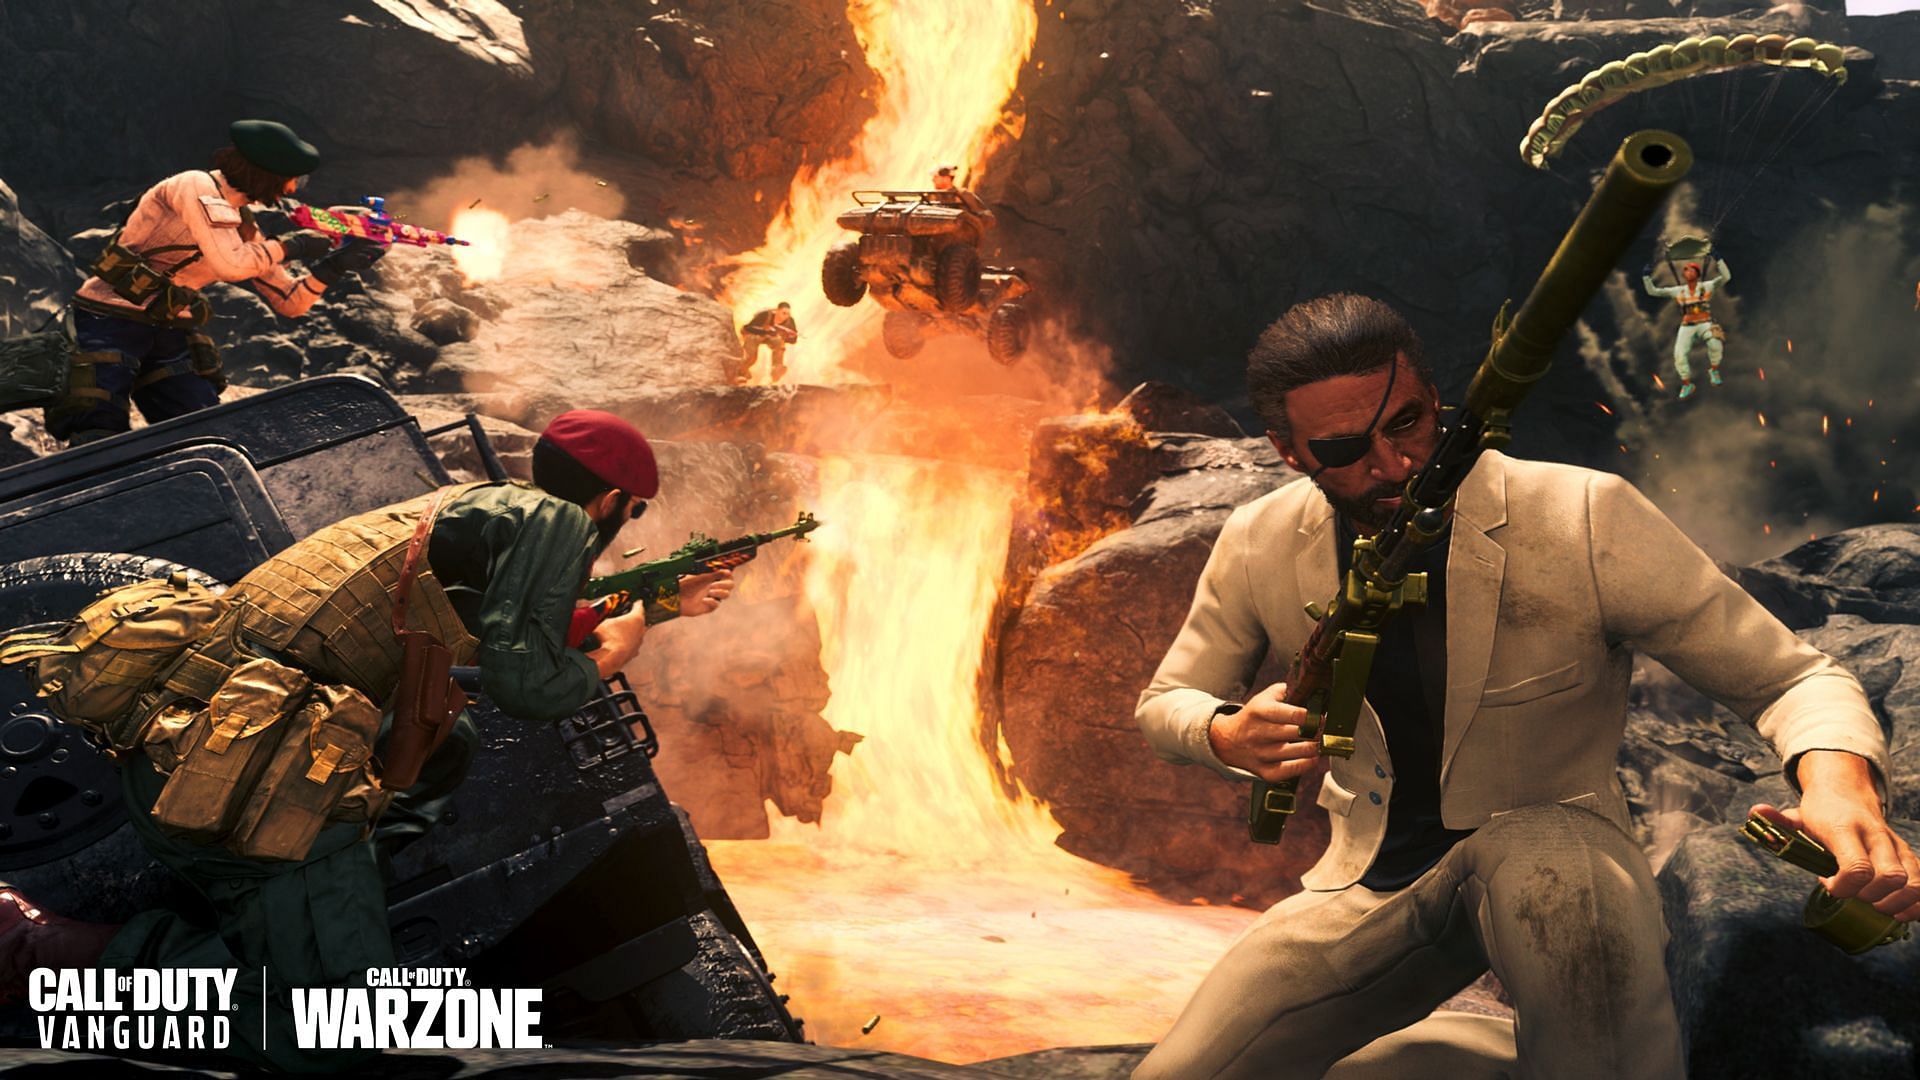 Raul Menendez in Call of Duty Warzone Season 5 &quot;Last Stand&quot; (image via Activision)